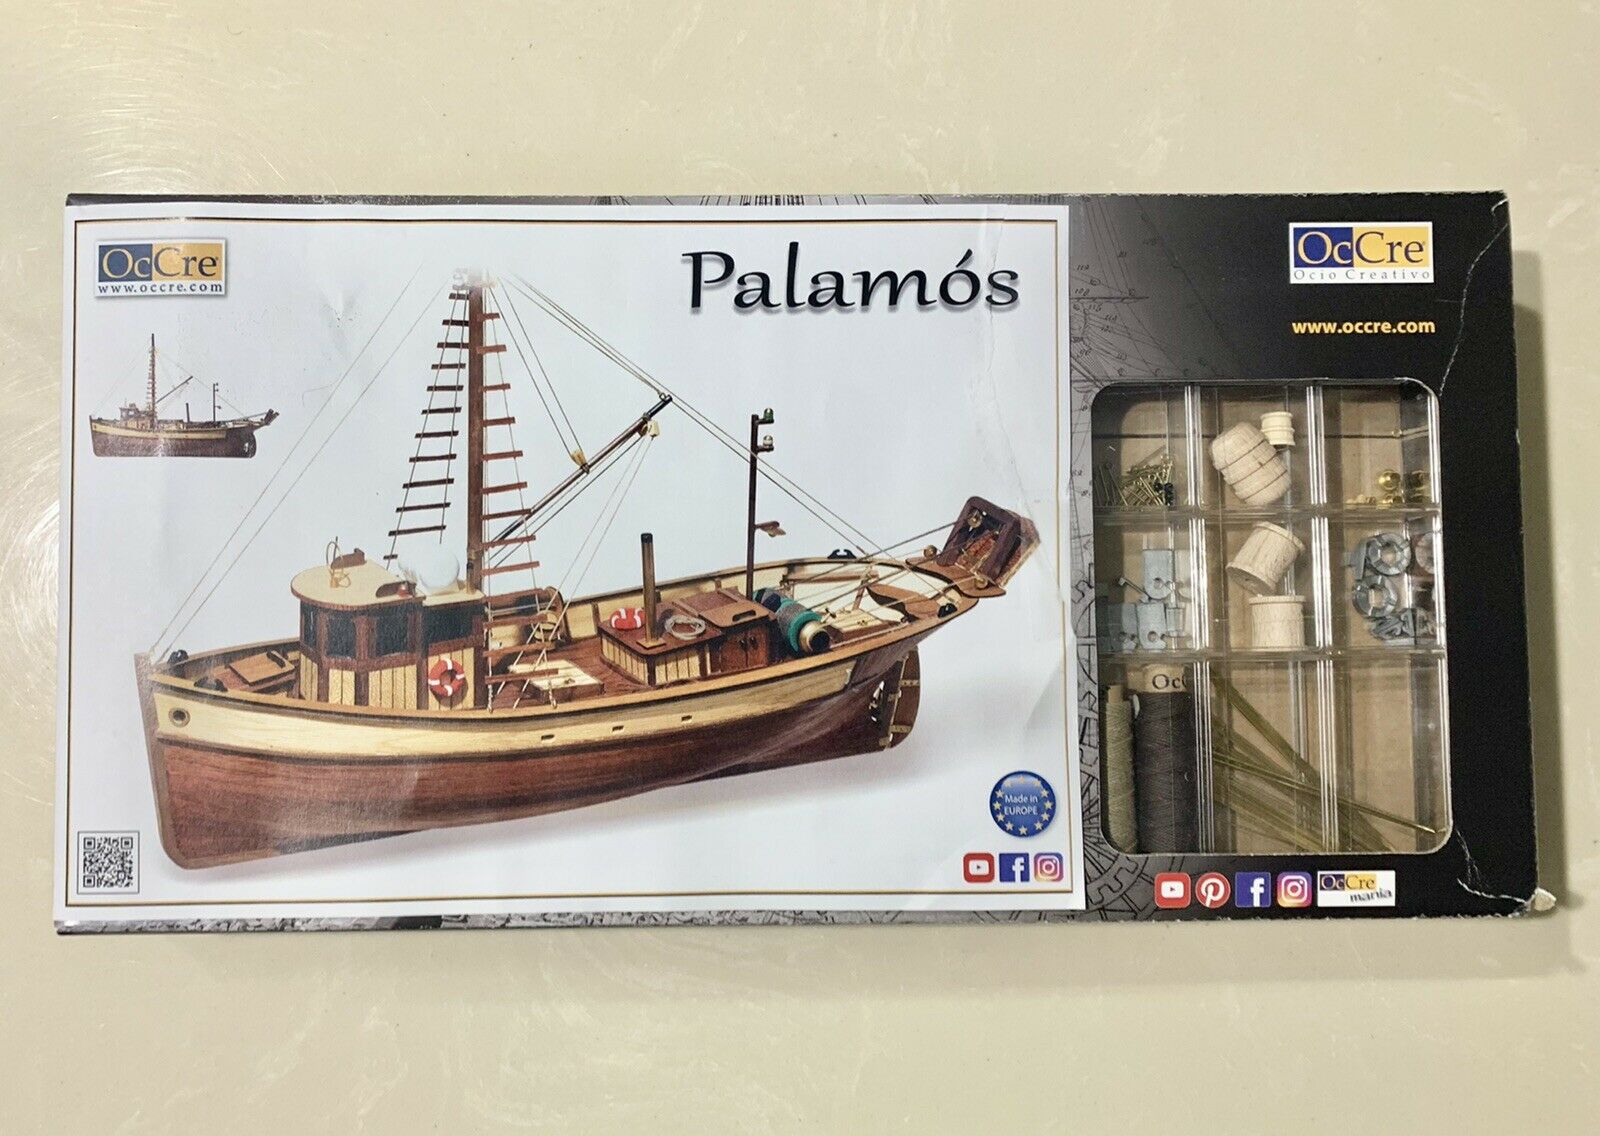 Occre Palamos Fishing Boat 1/45 Scale Model Kit. Niob. Complete W/ Instructions.